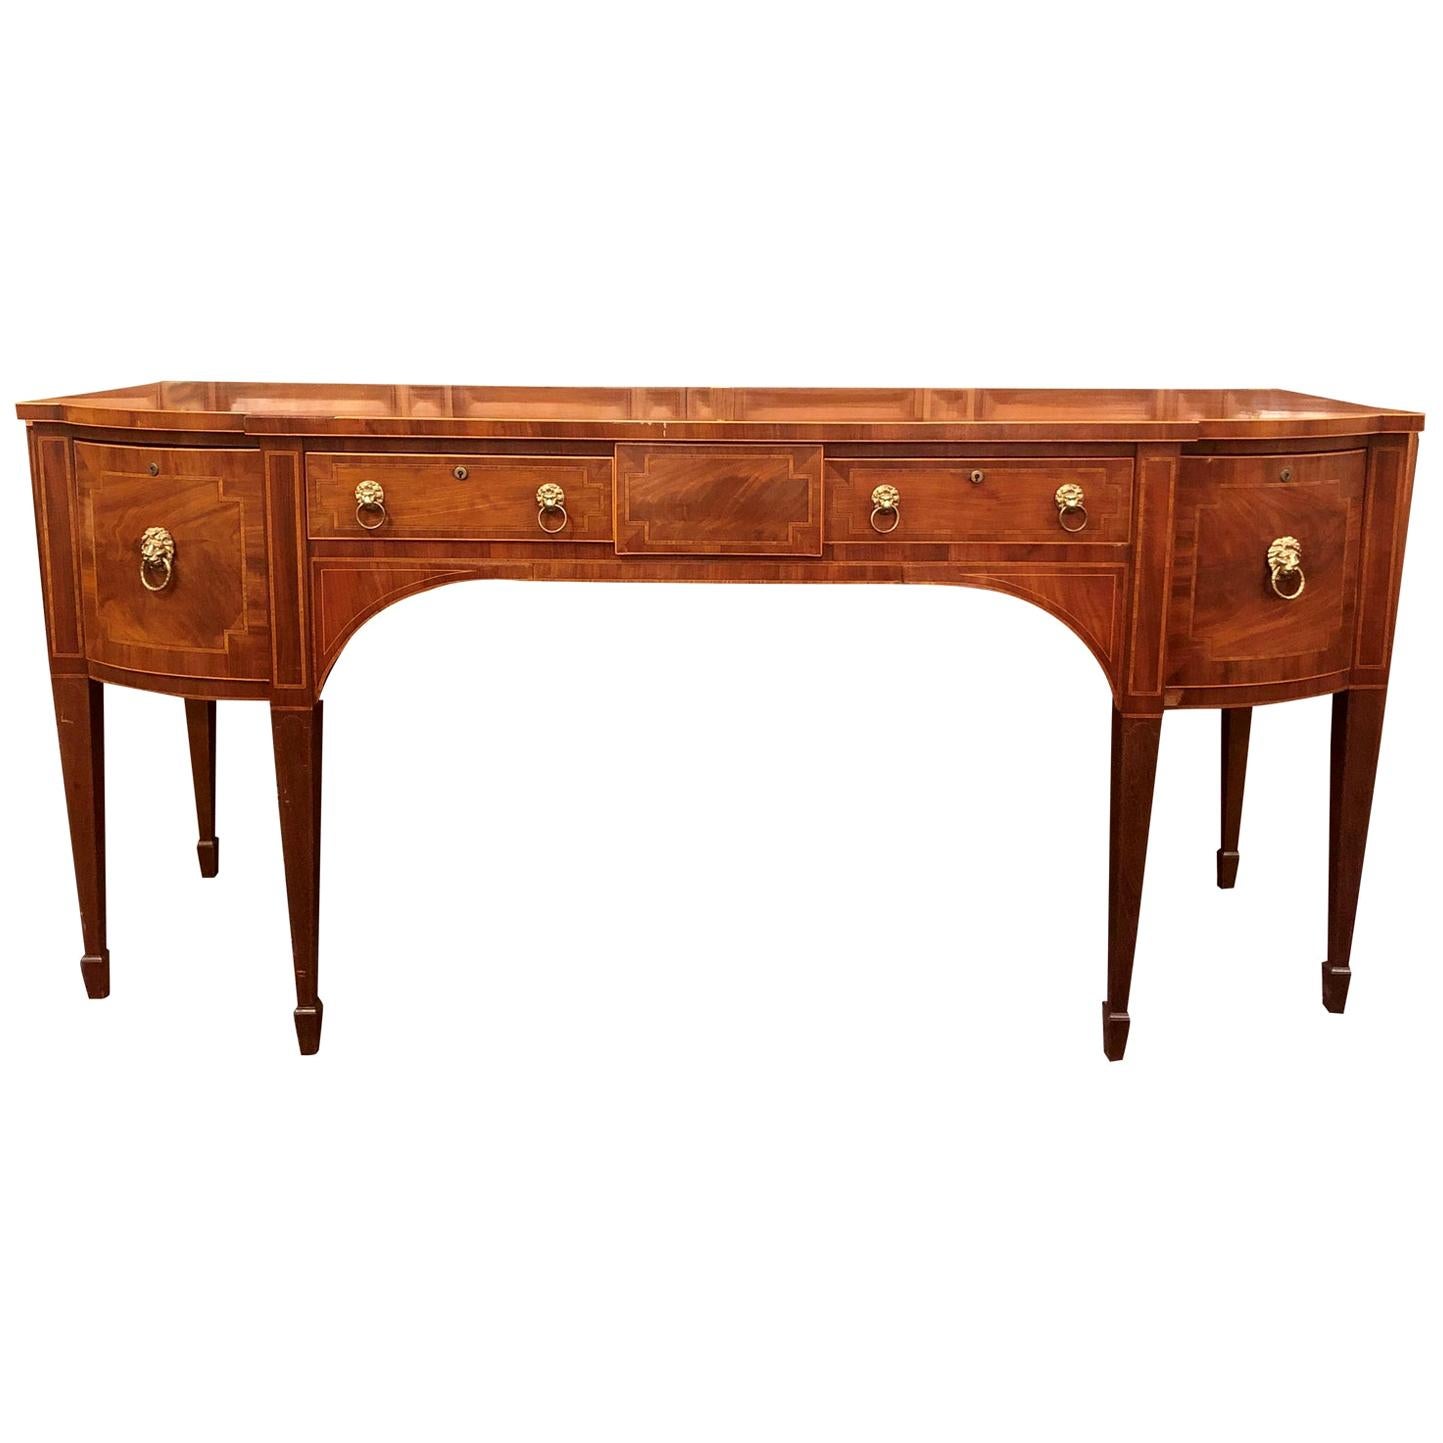 Antique Early 19th Century English Georgian Mahogany Sideboard For Sale